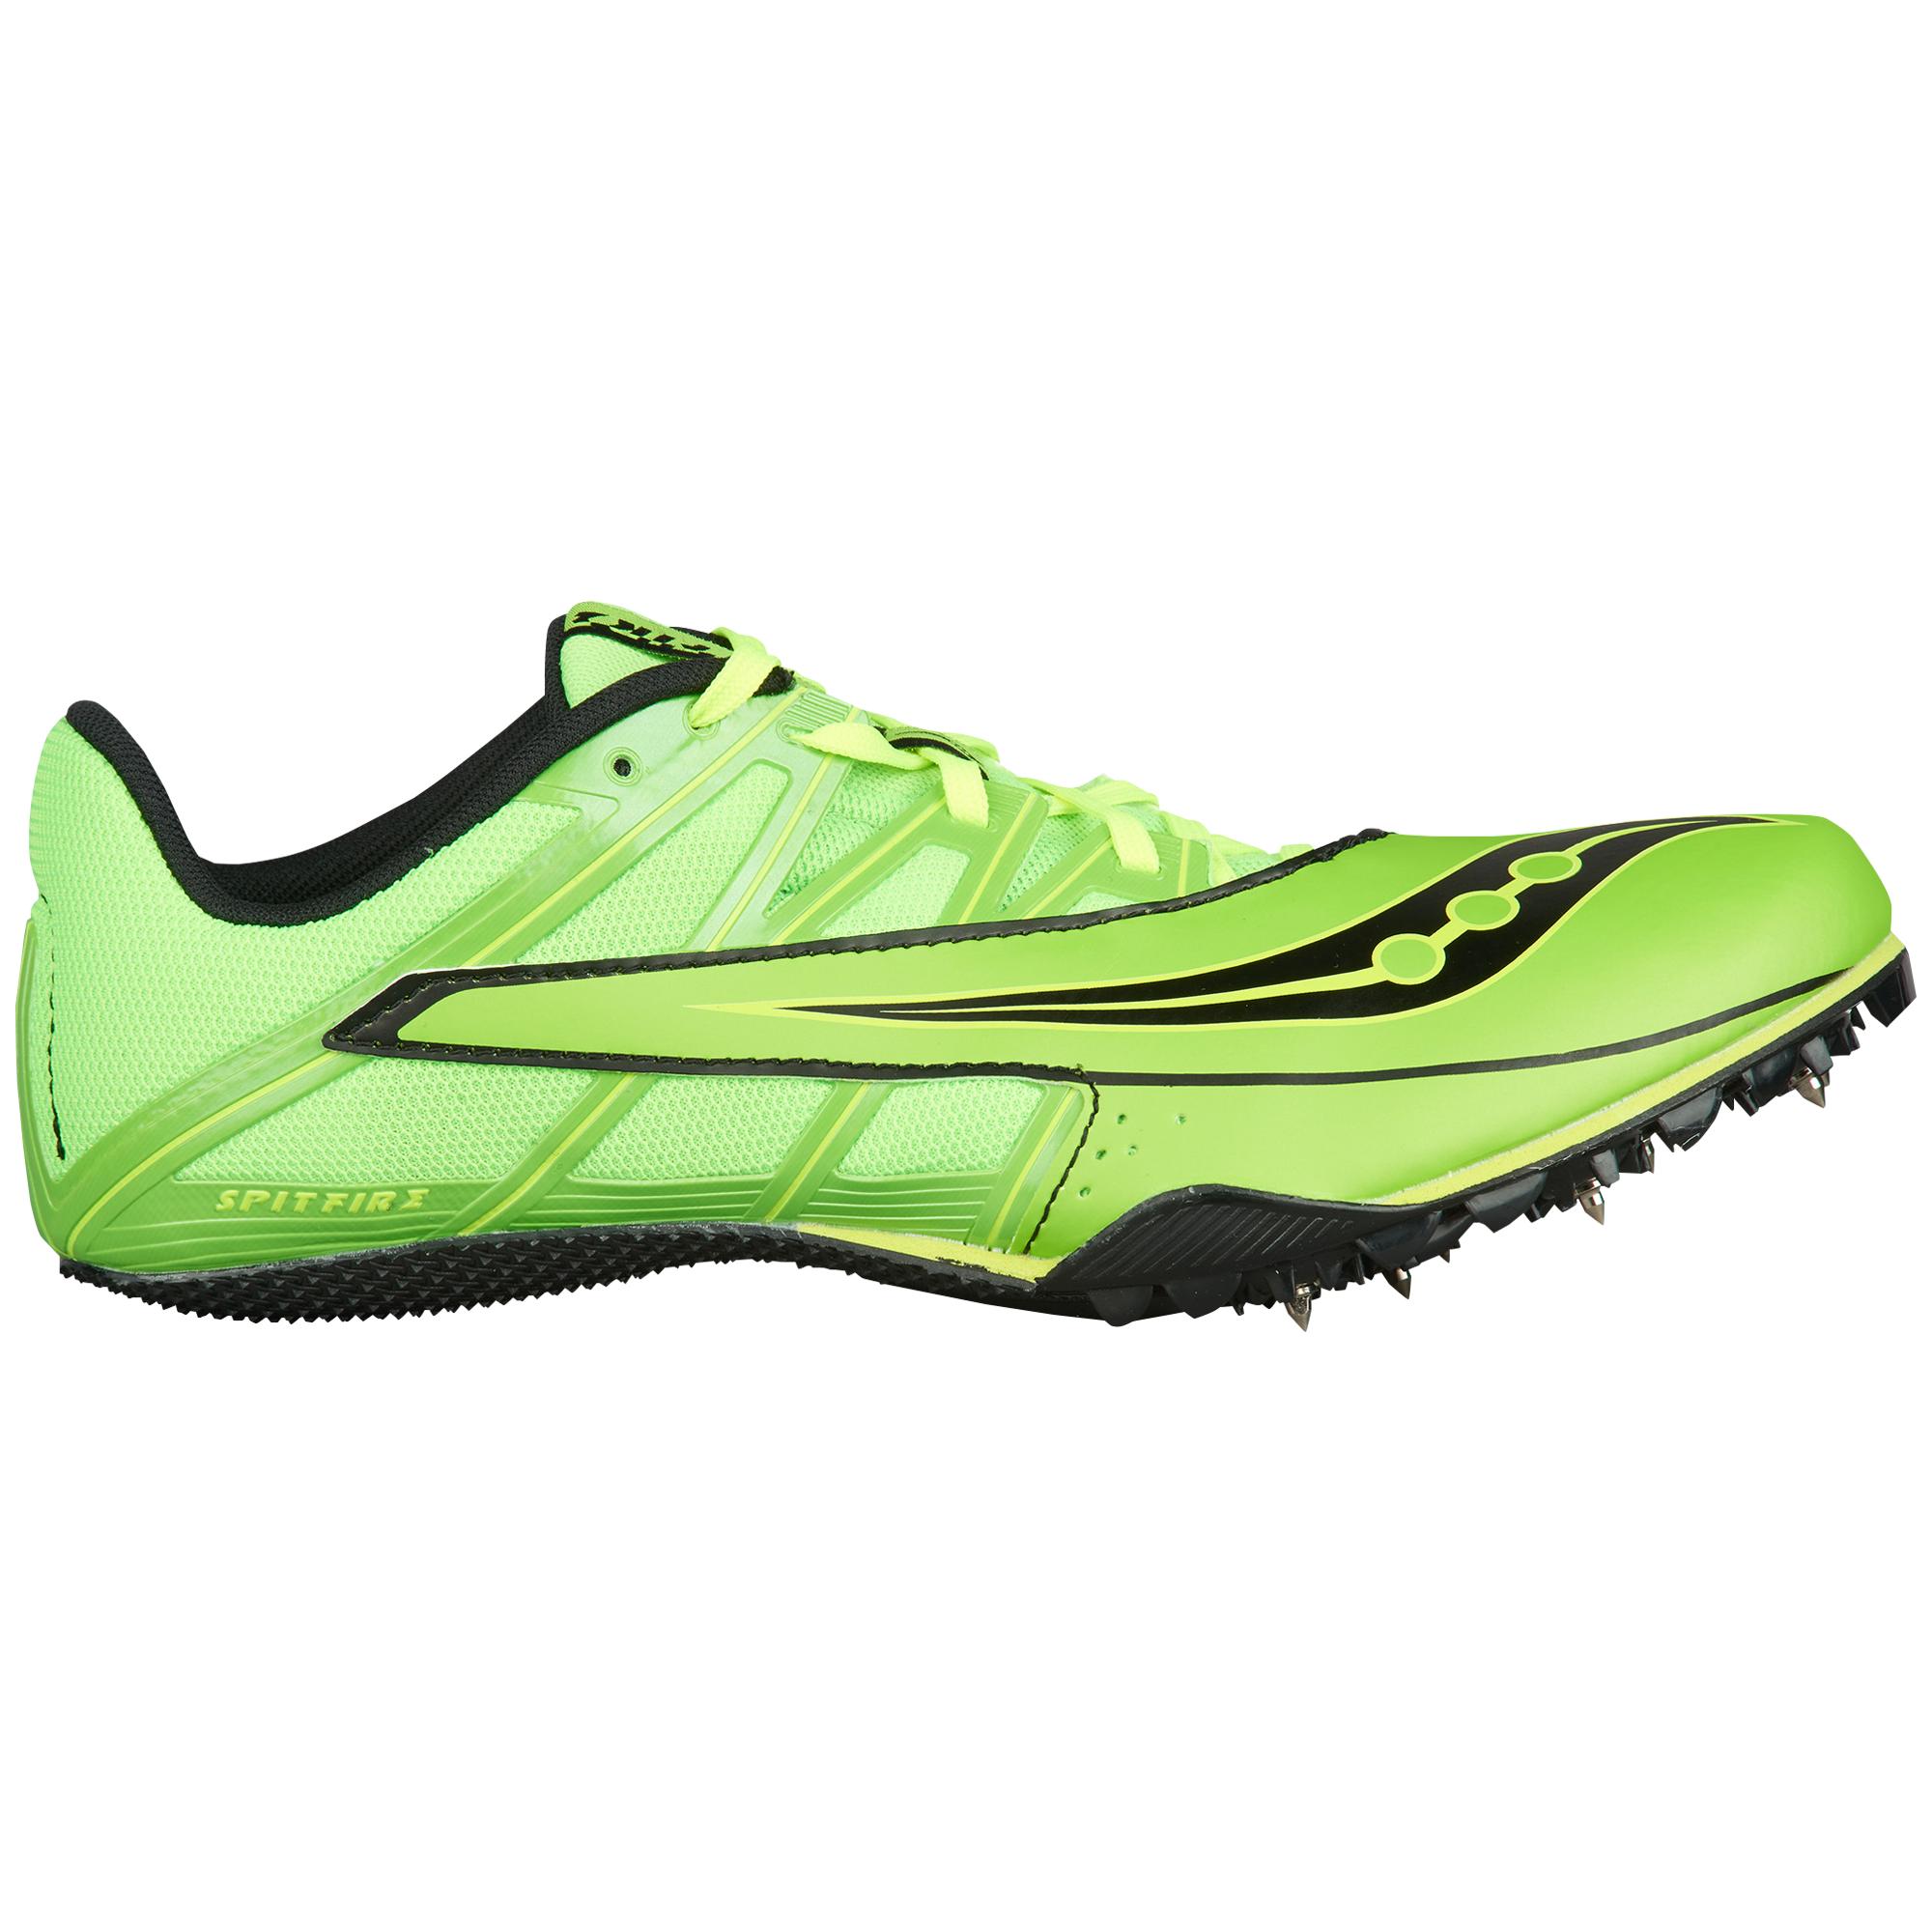 Saucony Synthetic Spitfire 4 Sprint Spikes in Green/Black (Green) for ...